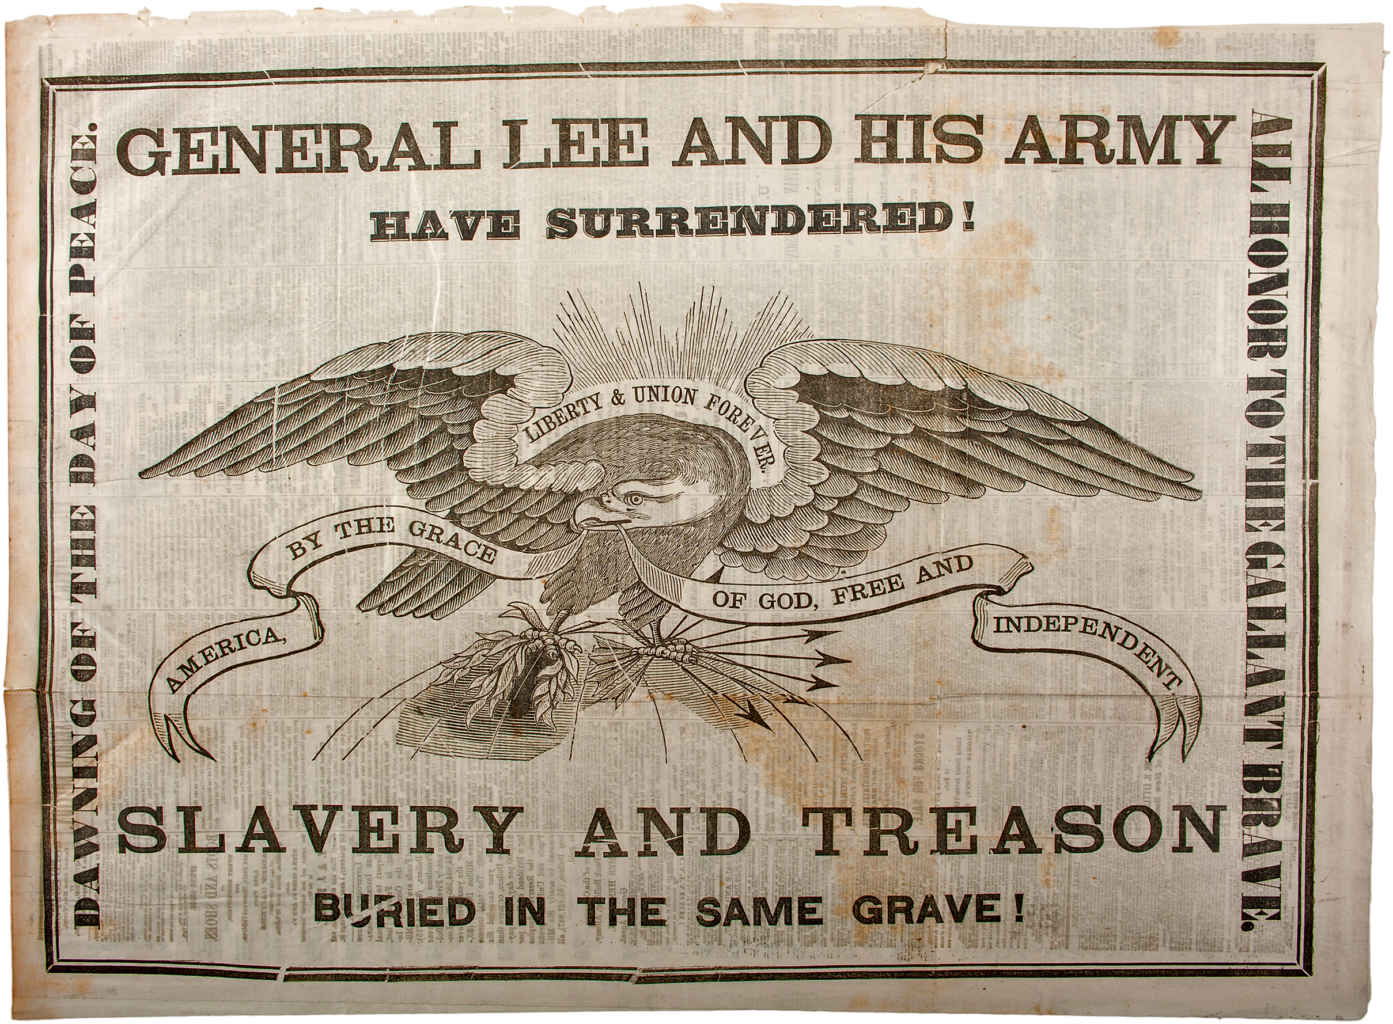 albany-Lee_Surrendered_Albany_Journal_10_Apr_1865-1393x1024.png